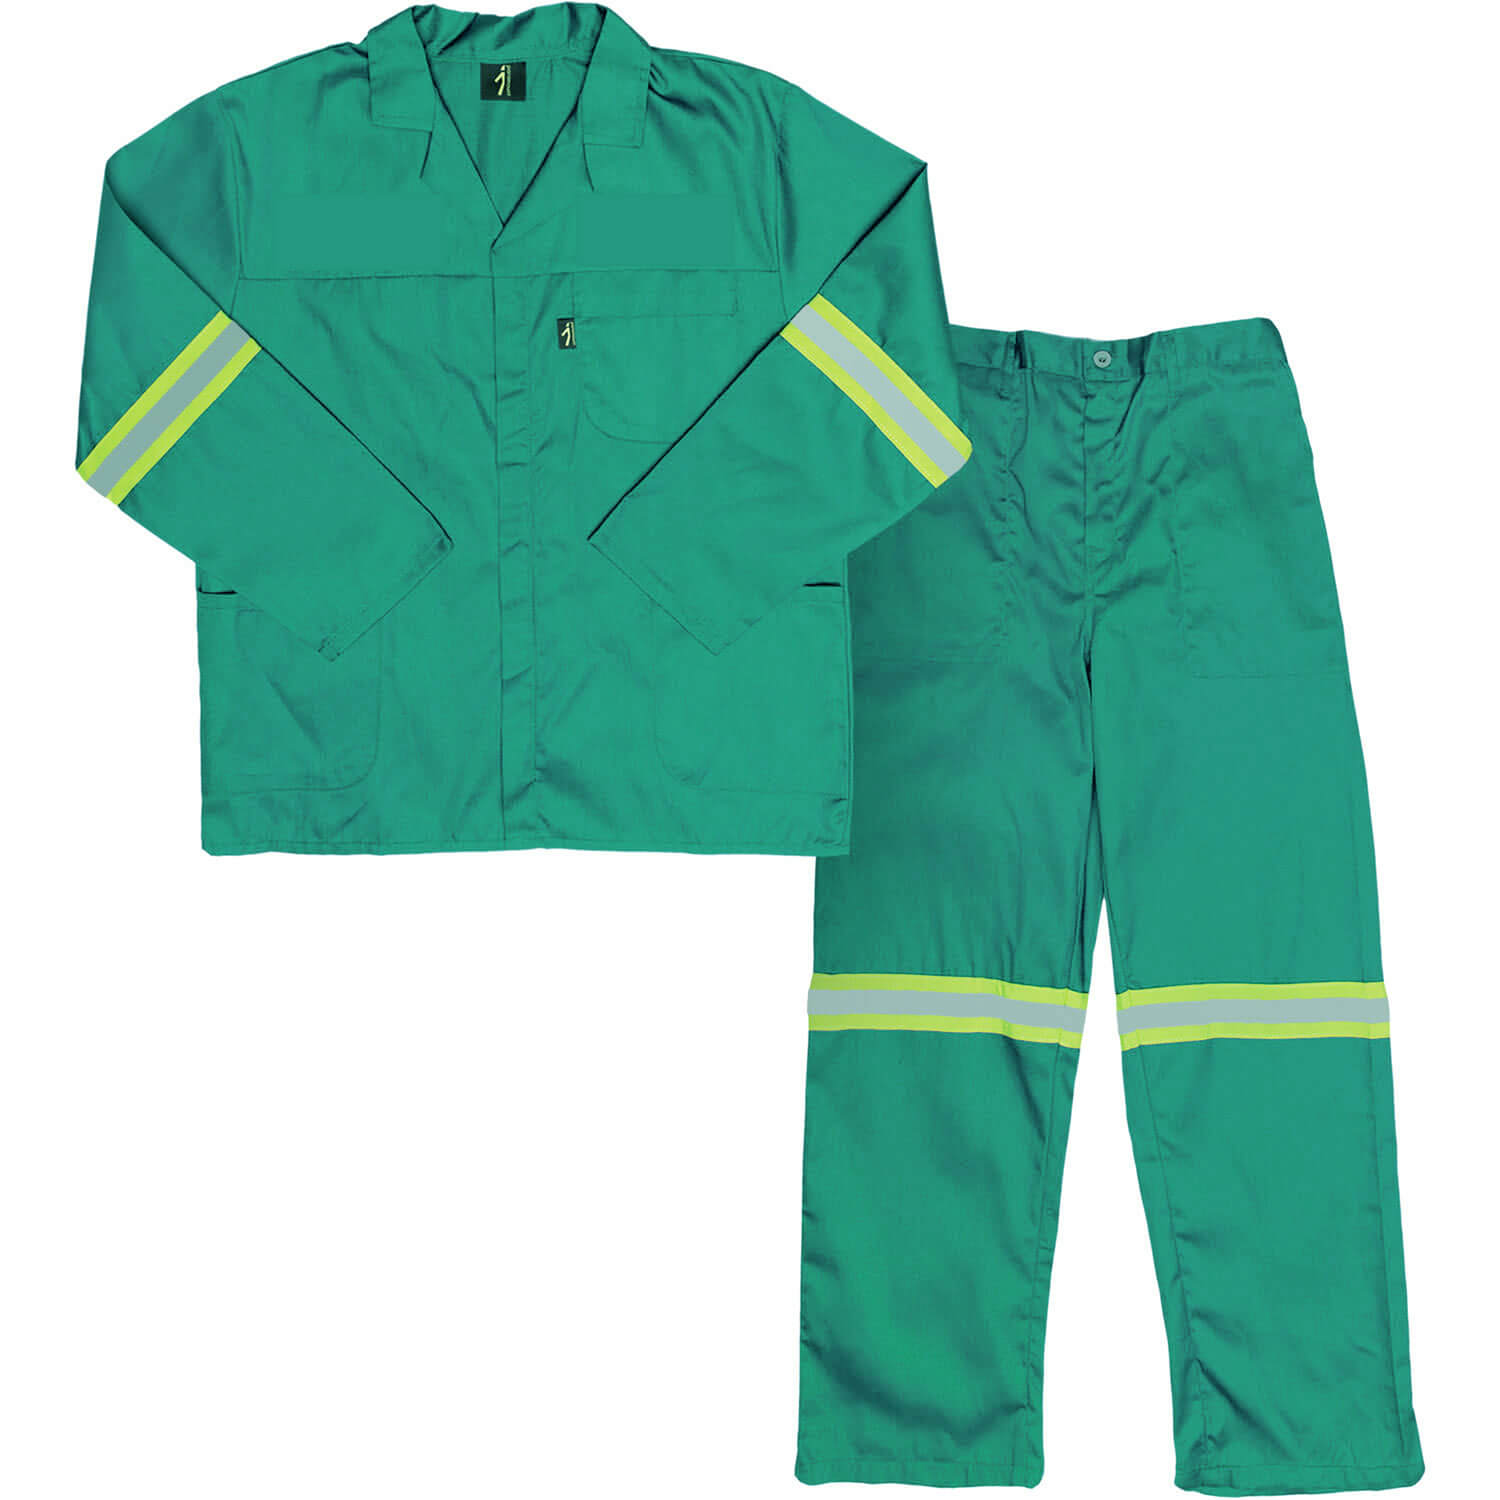 4444EGPC Paramount Reflective Conti Suit Emerald Green